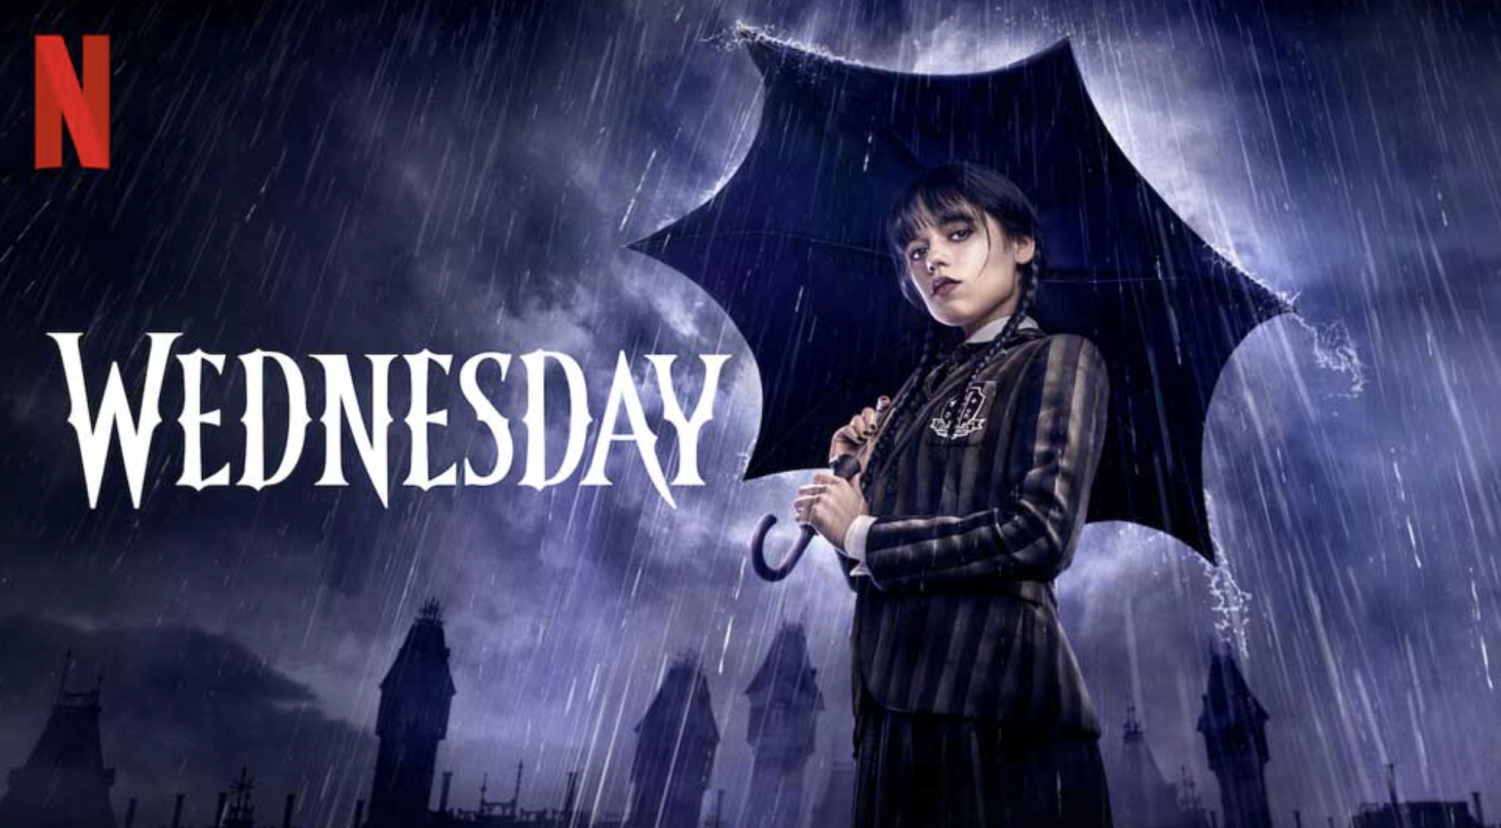 Does Wednesday Blink in Tim Burton and Netflix's Wednesday? Why